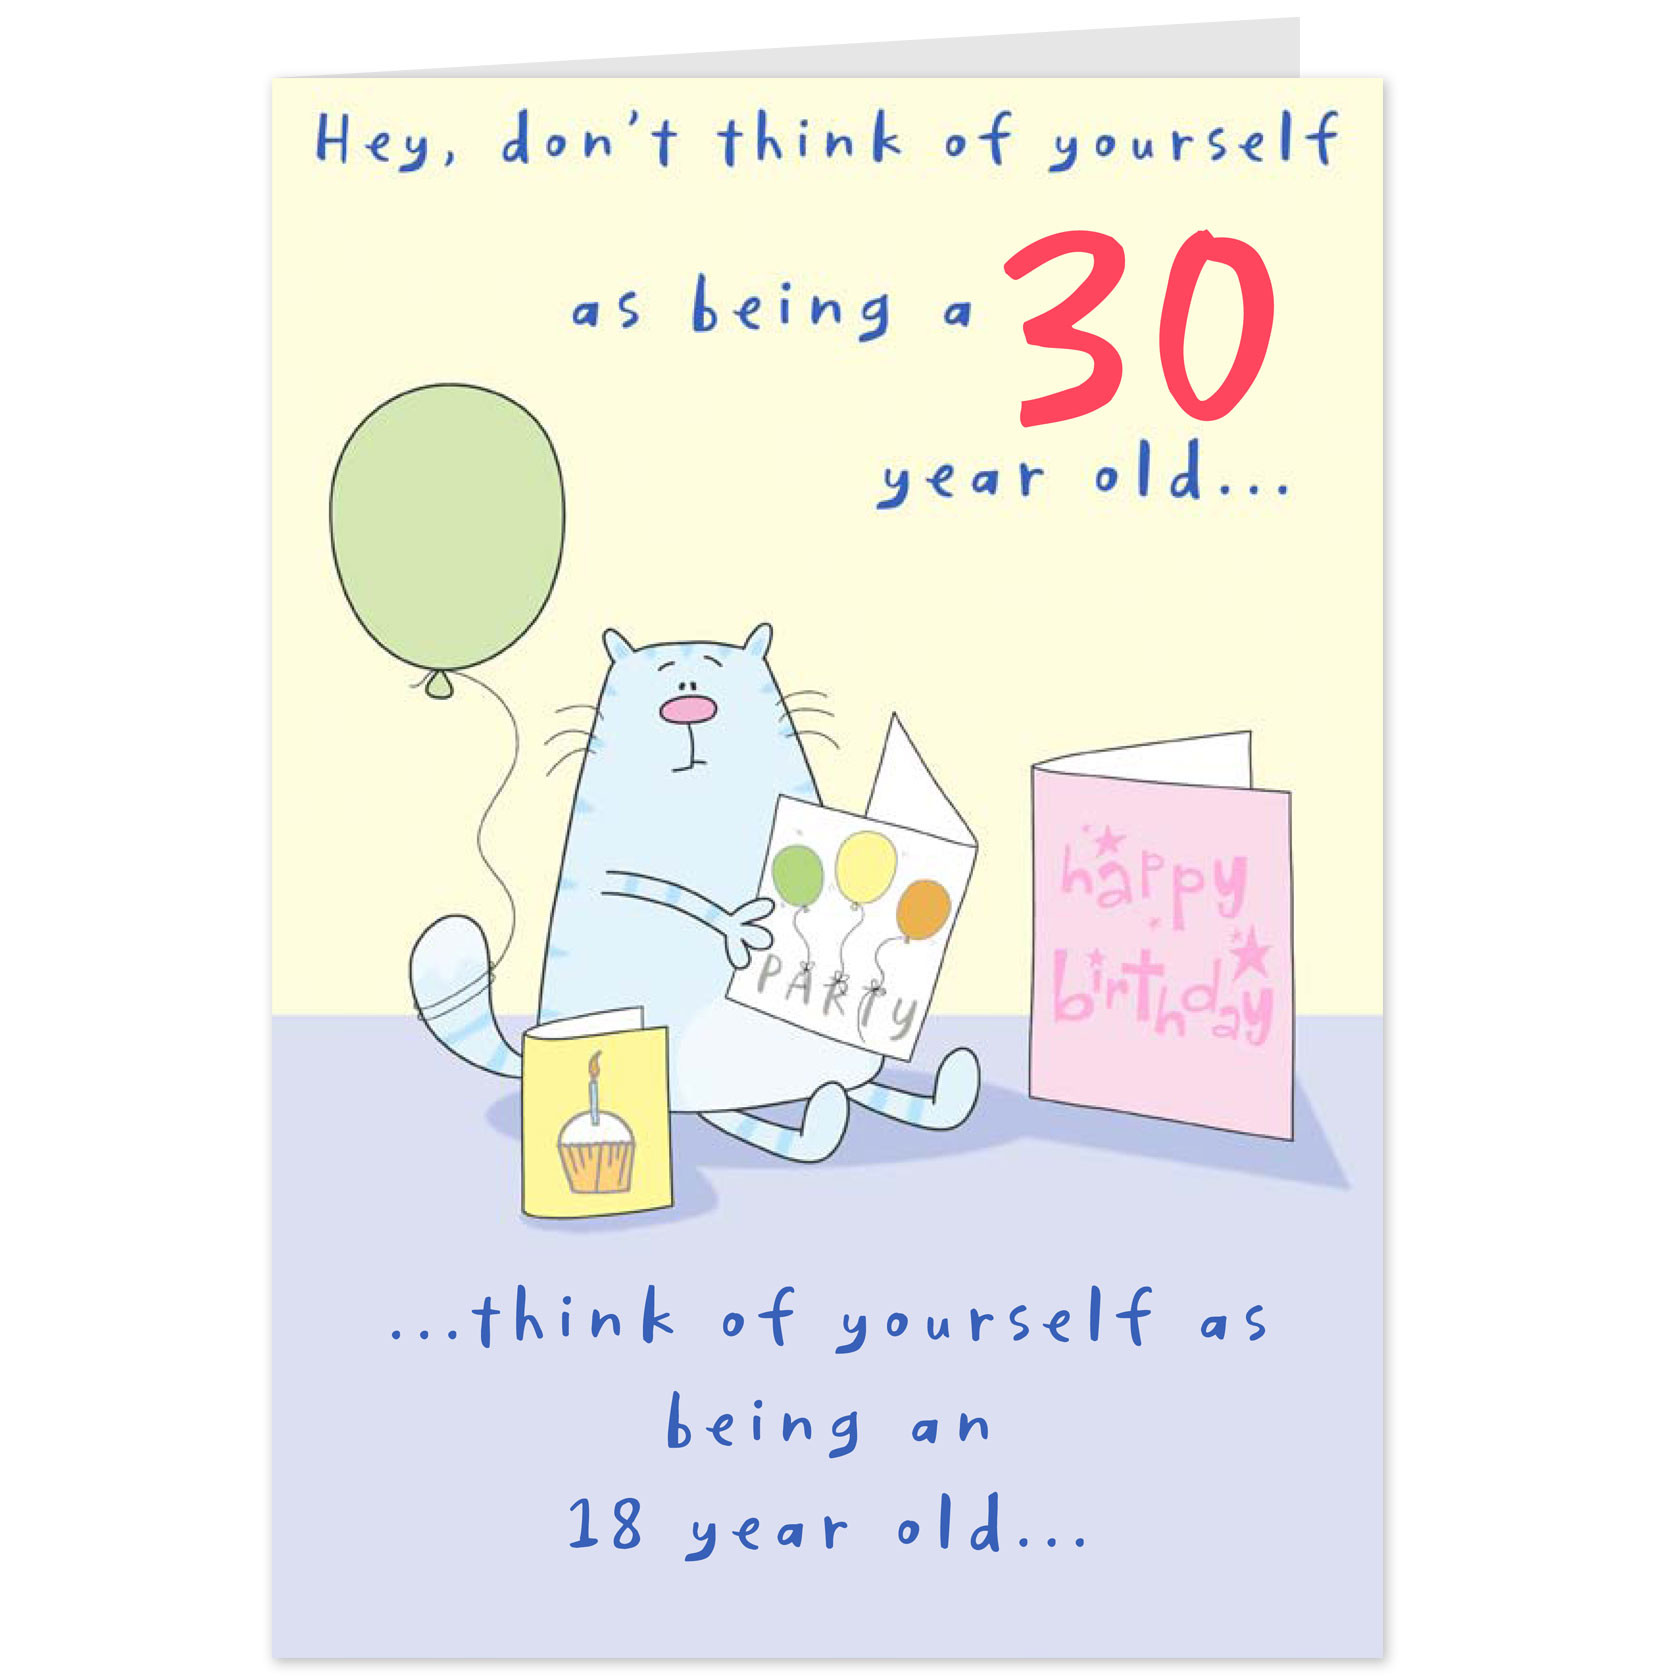 Quote For Birthday Card
 1st Birthday Quotes For Cards QuotesGram